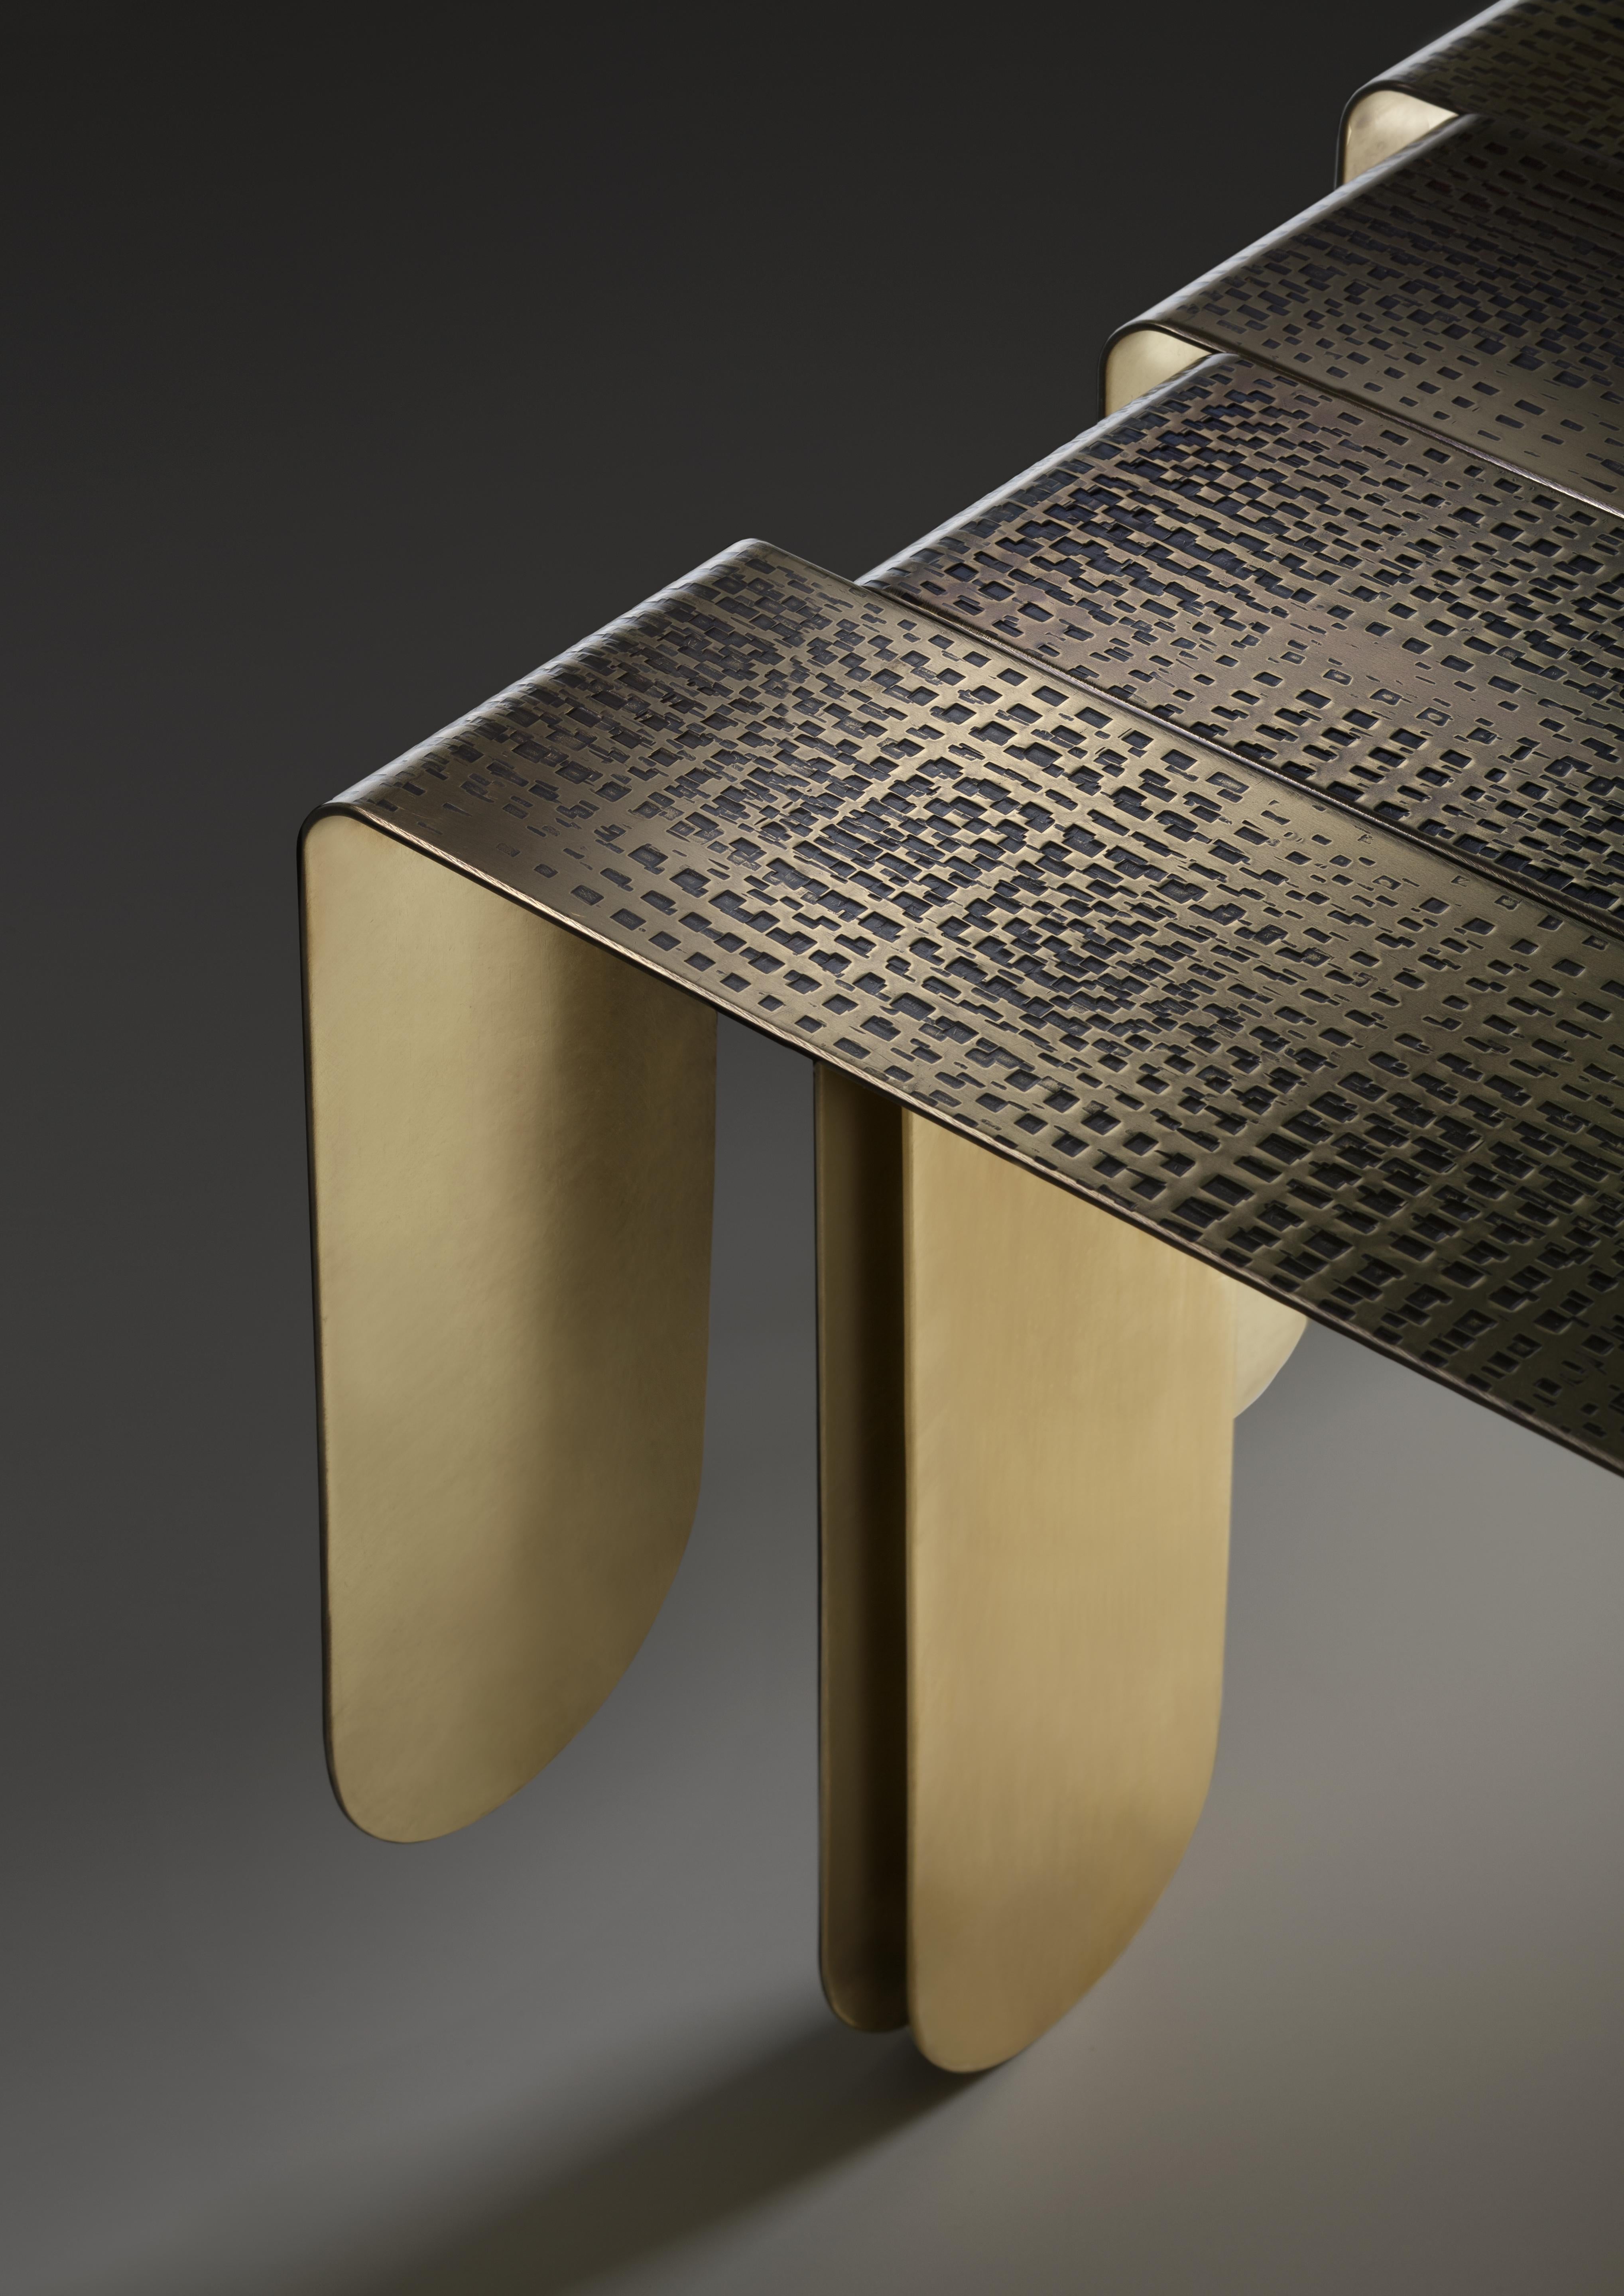 Inspired by the refined, sinuous aesthetics of Art Nouveau, the Xilo coffee tablei is a veritable sculpture
in metal that exalts the hand-crafted techniques and manufacturing excellence of the company.
Three sheets of thick brass, rounded at the